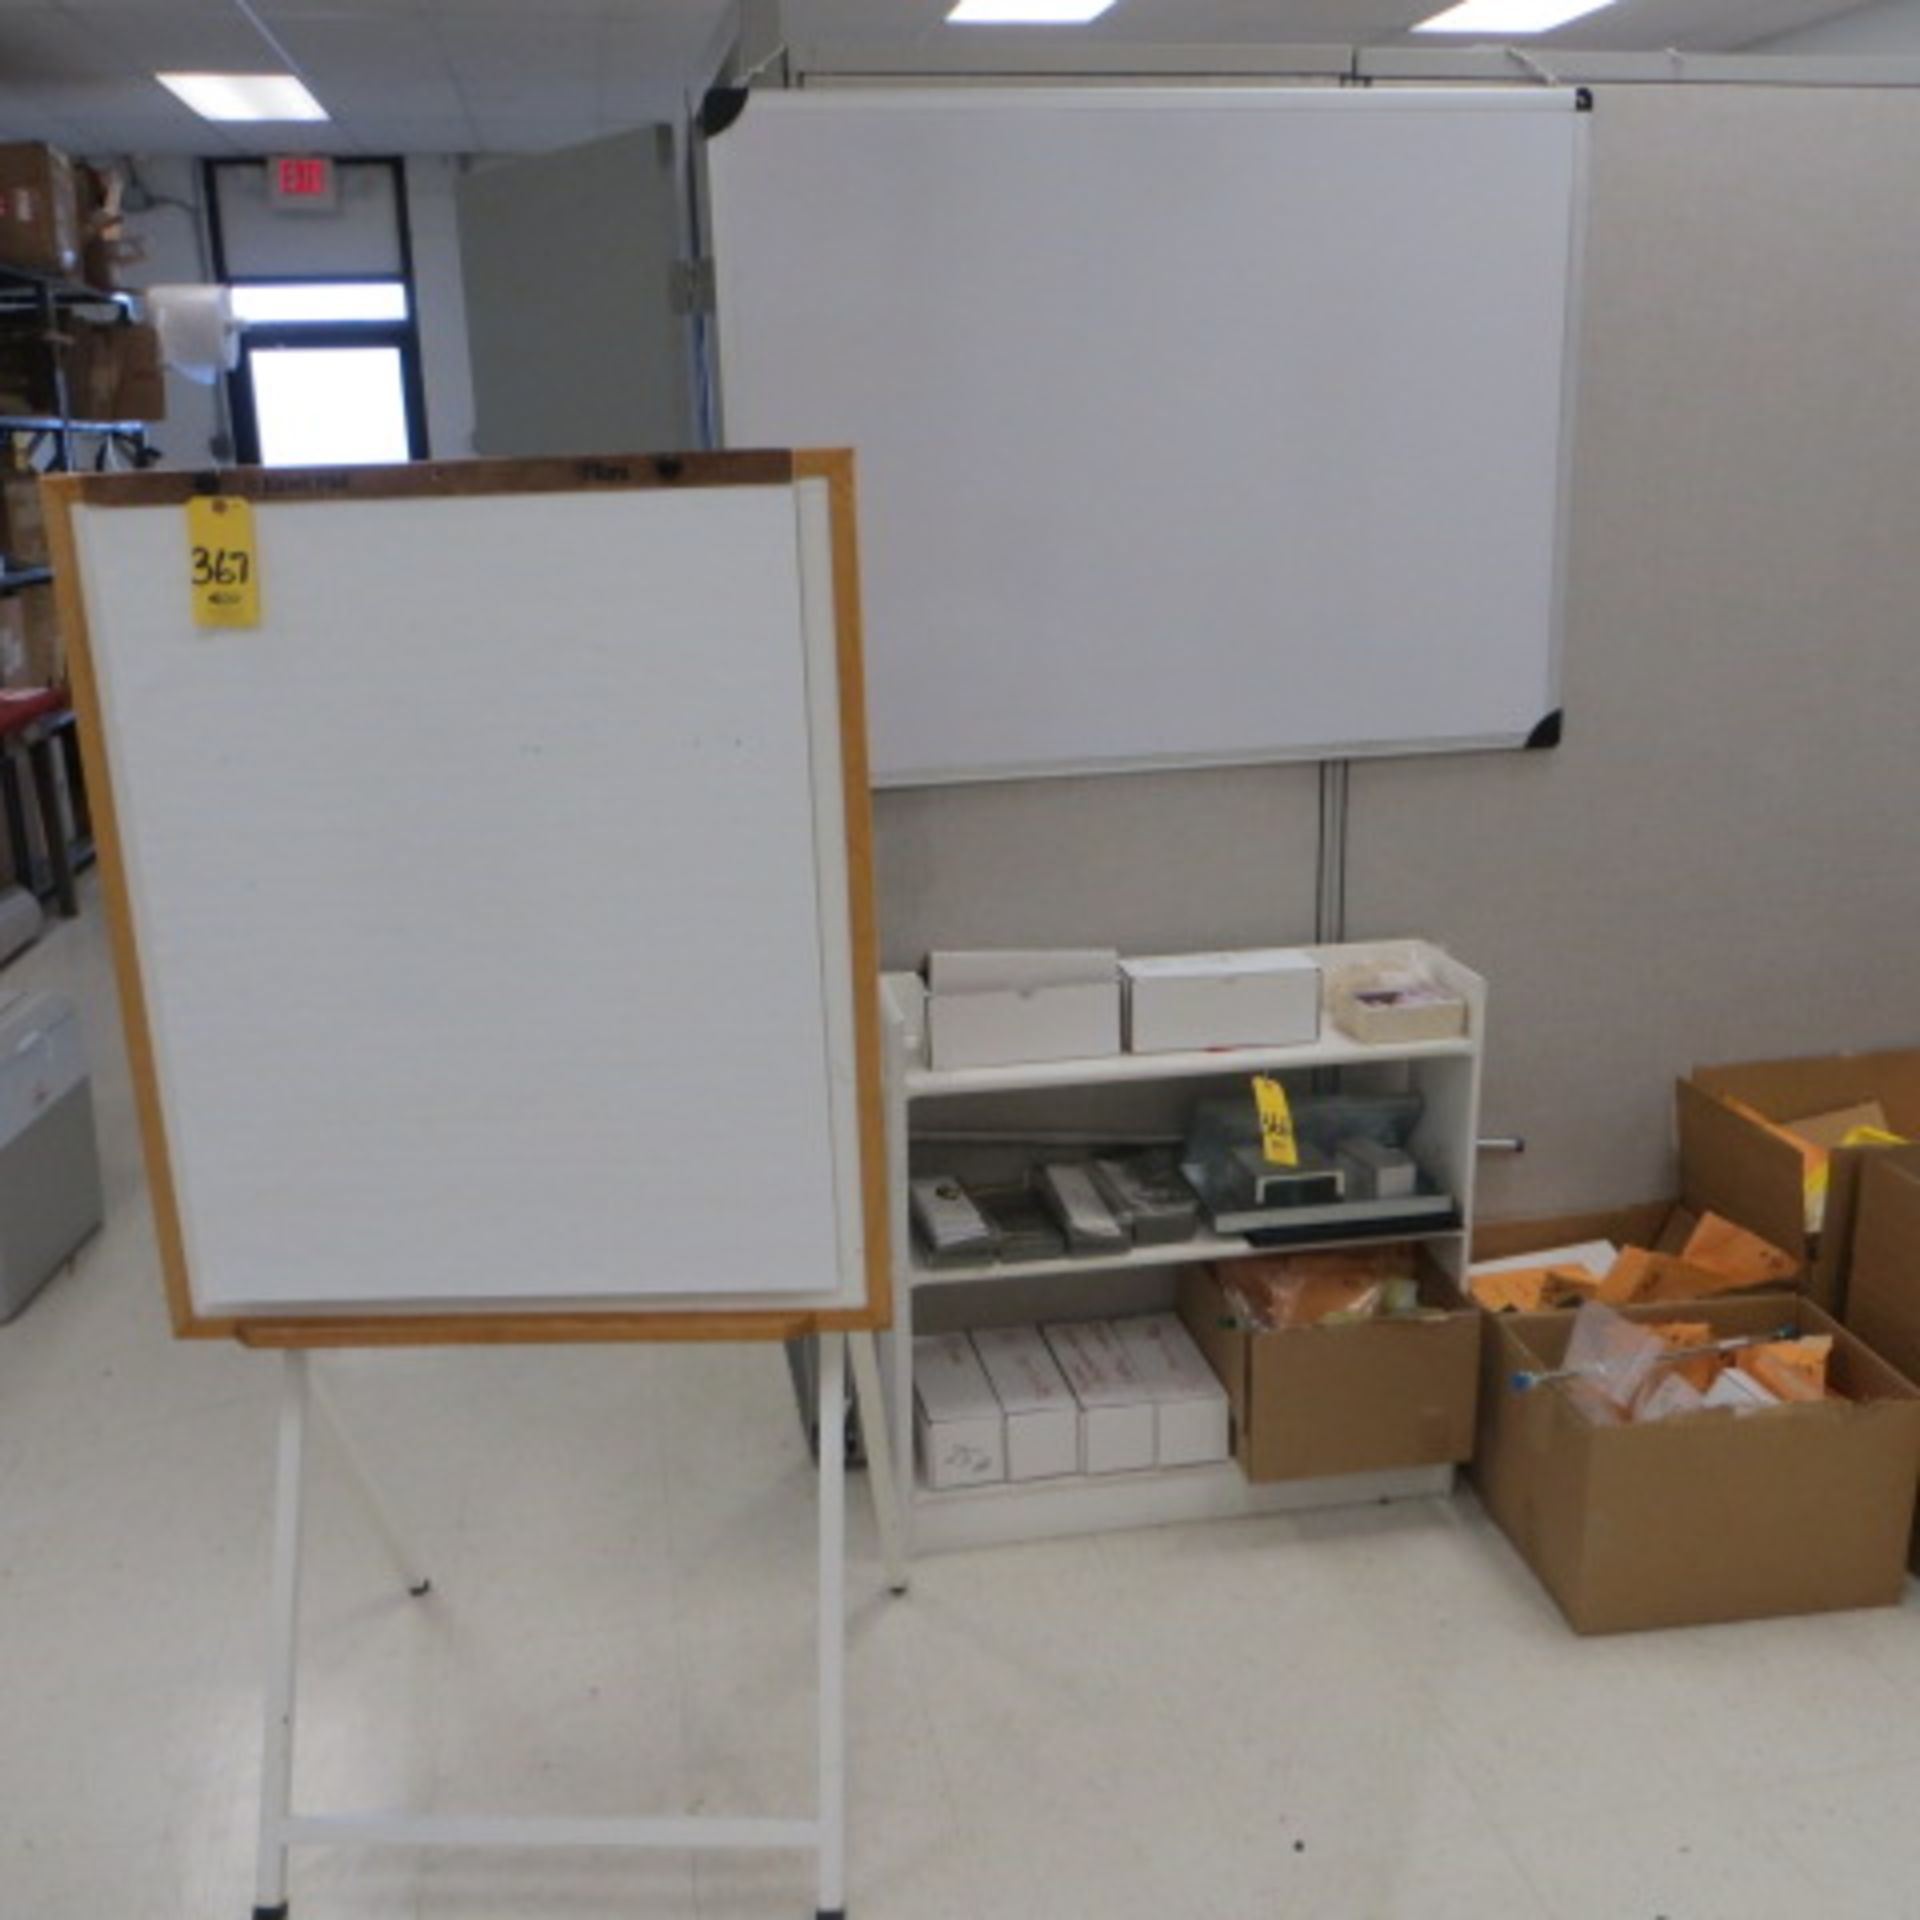 EASEL AND ERASE BOARD